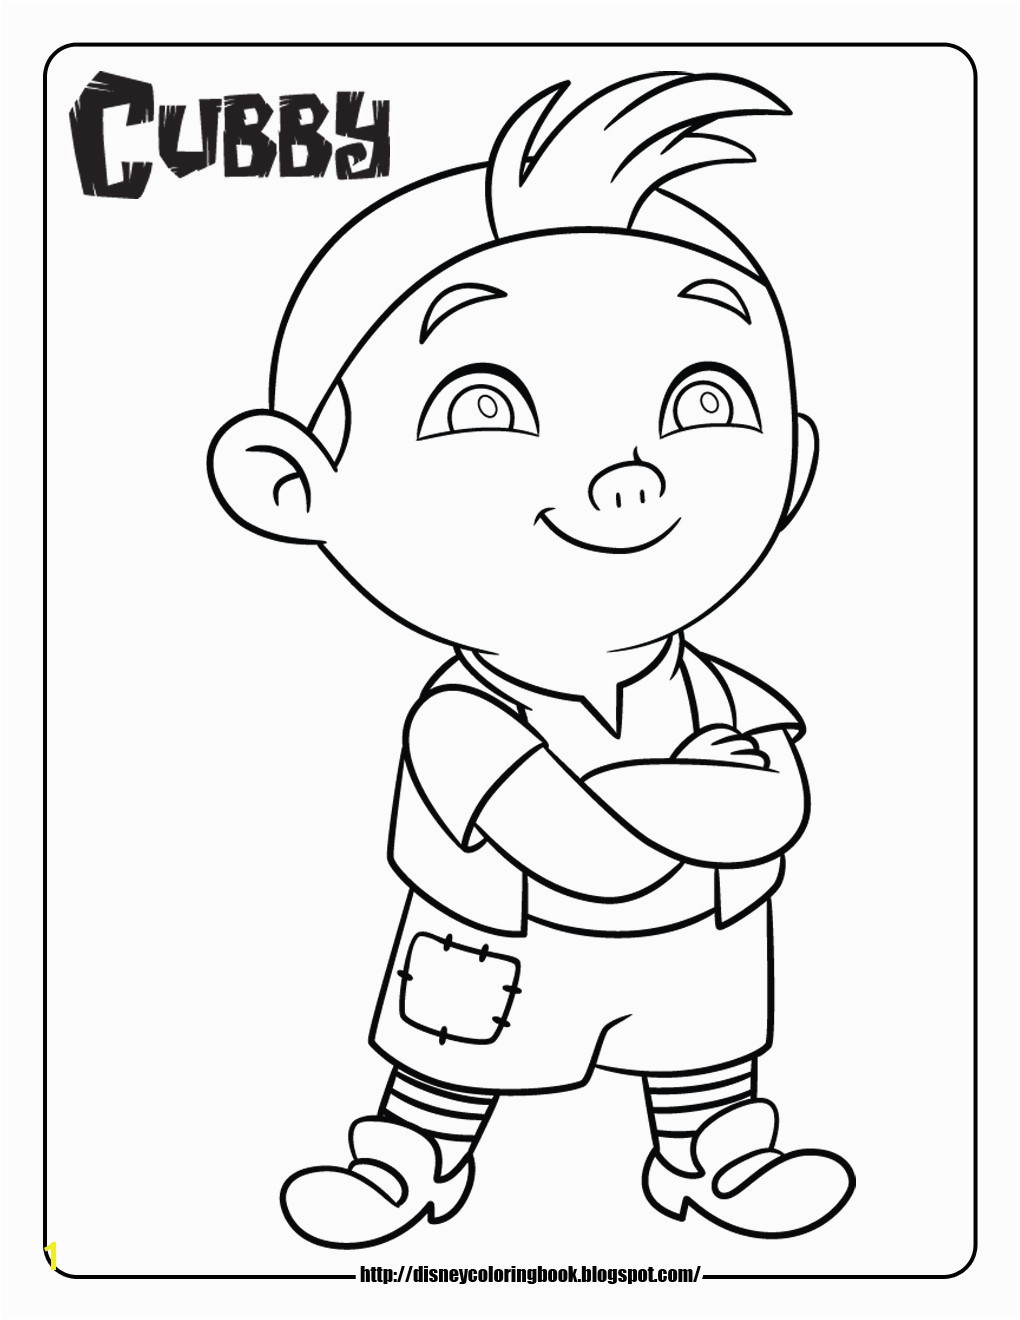 jake and the never land pirates coloring pages coloring sheets cubby